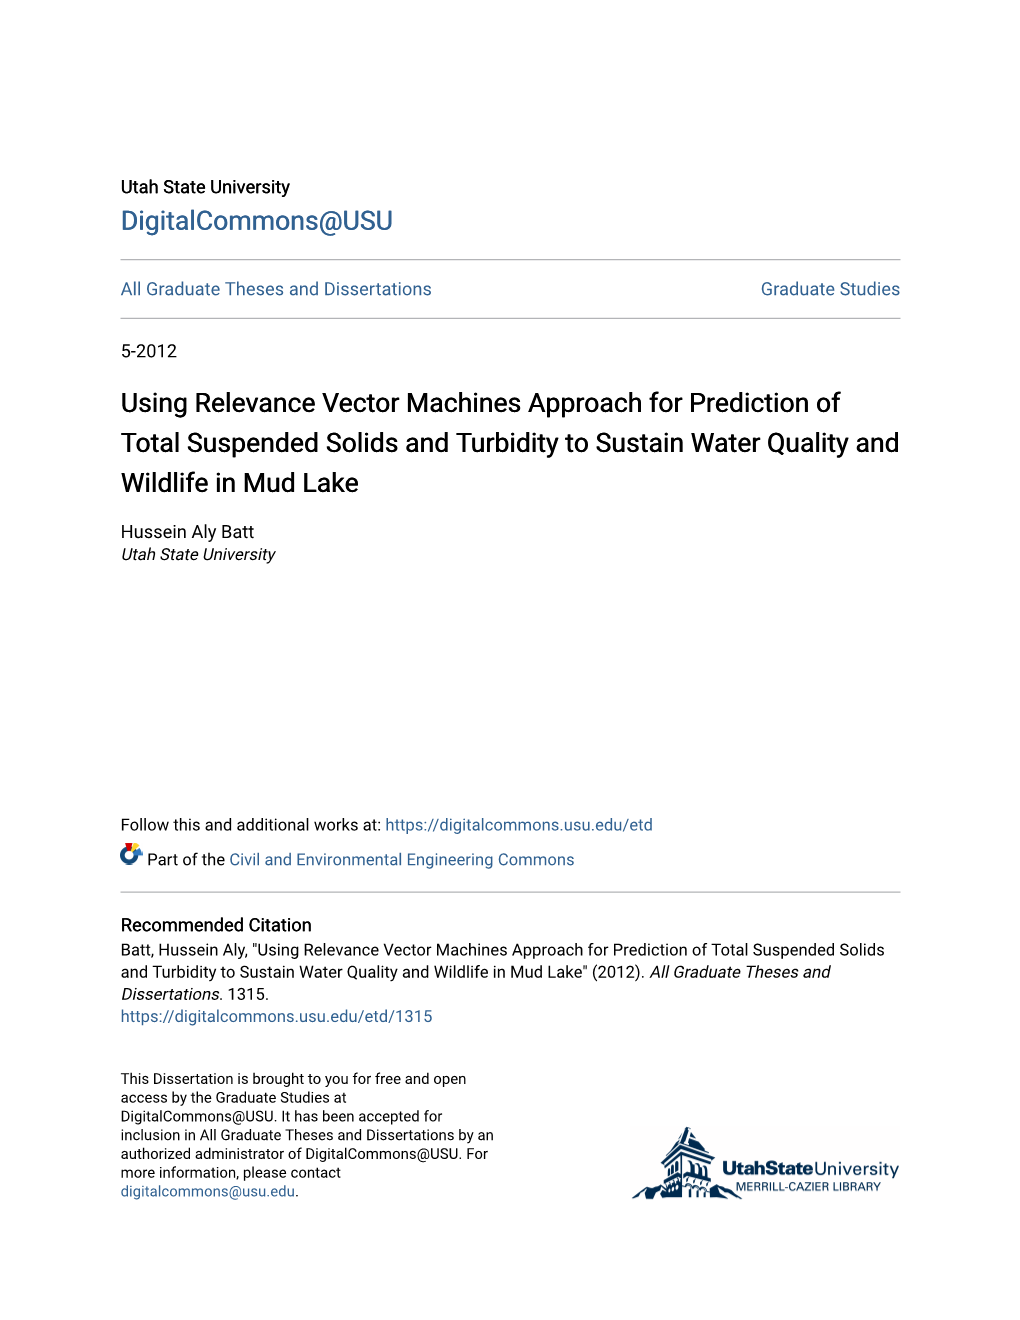 Using Relevance Vector Machines Approach for Prediction of Total Suspended Solids and Turbidity to Sustain Water Quality and Wildlife in Mud Lake